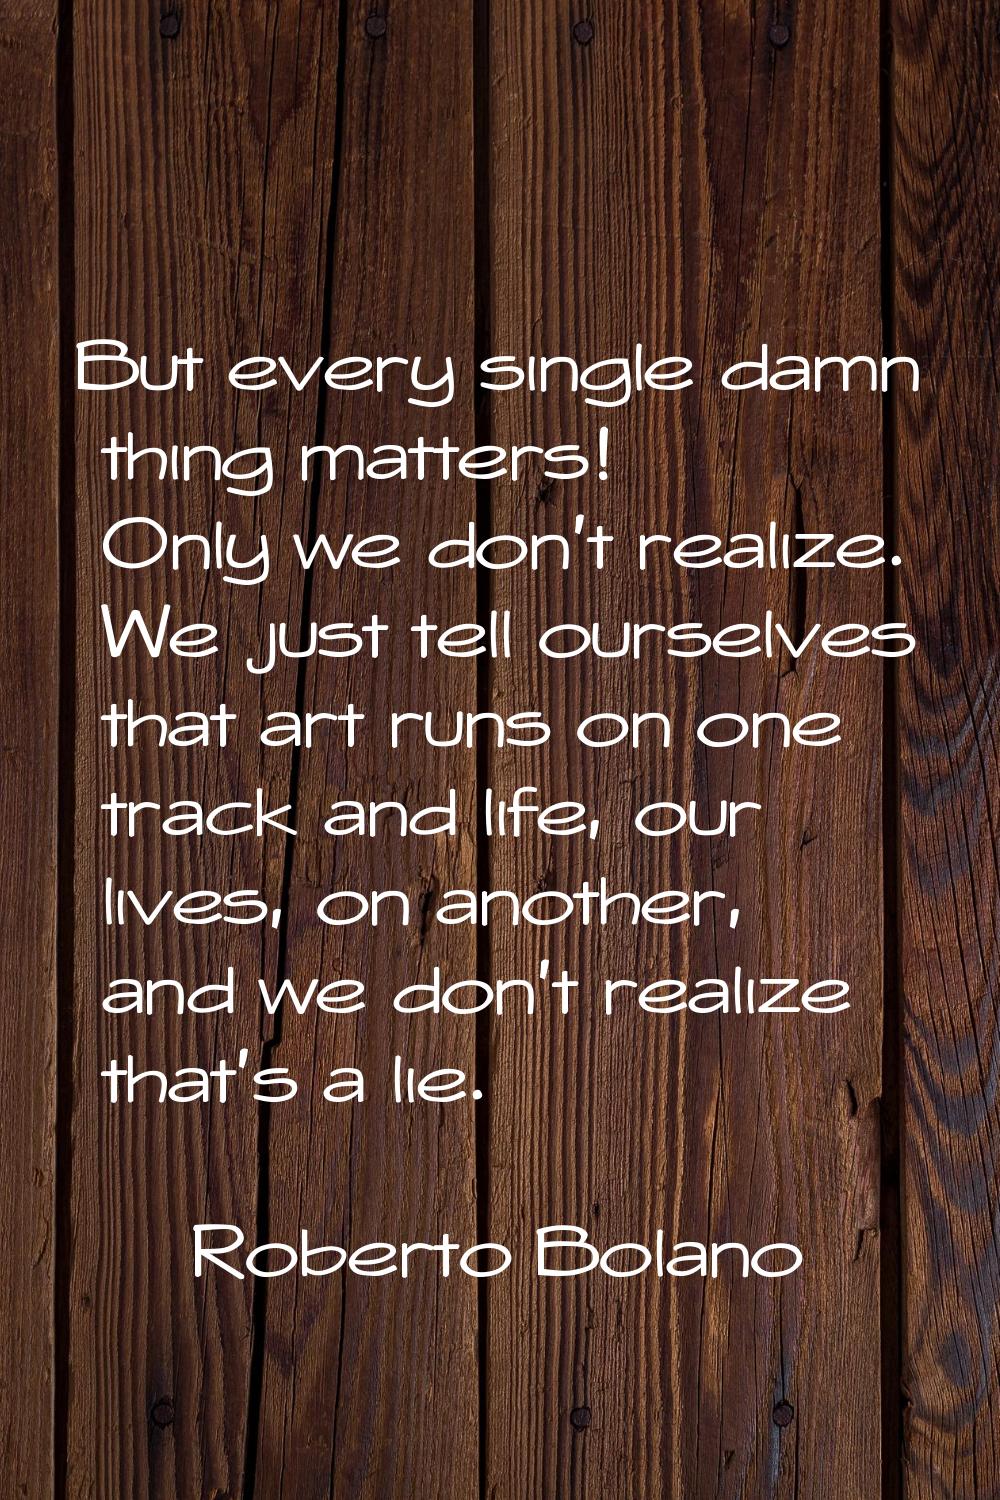 But every single damn thing matters! Only we don't realize. We just tell ourselves that art runs on